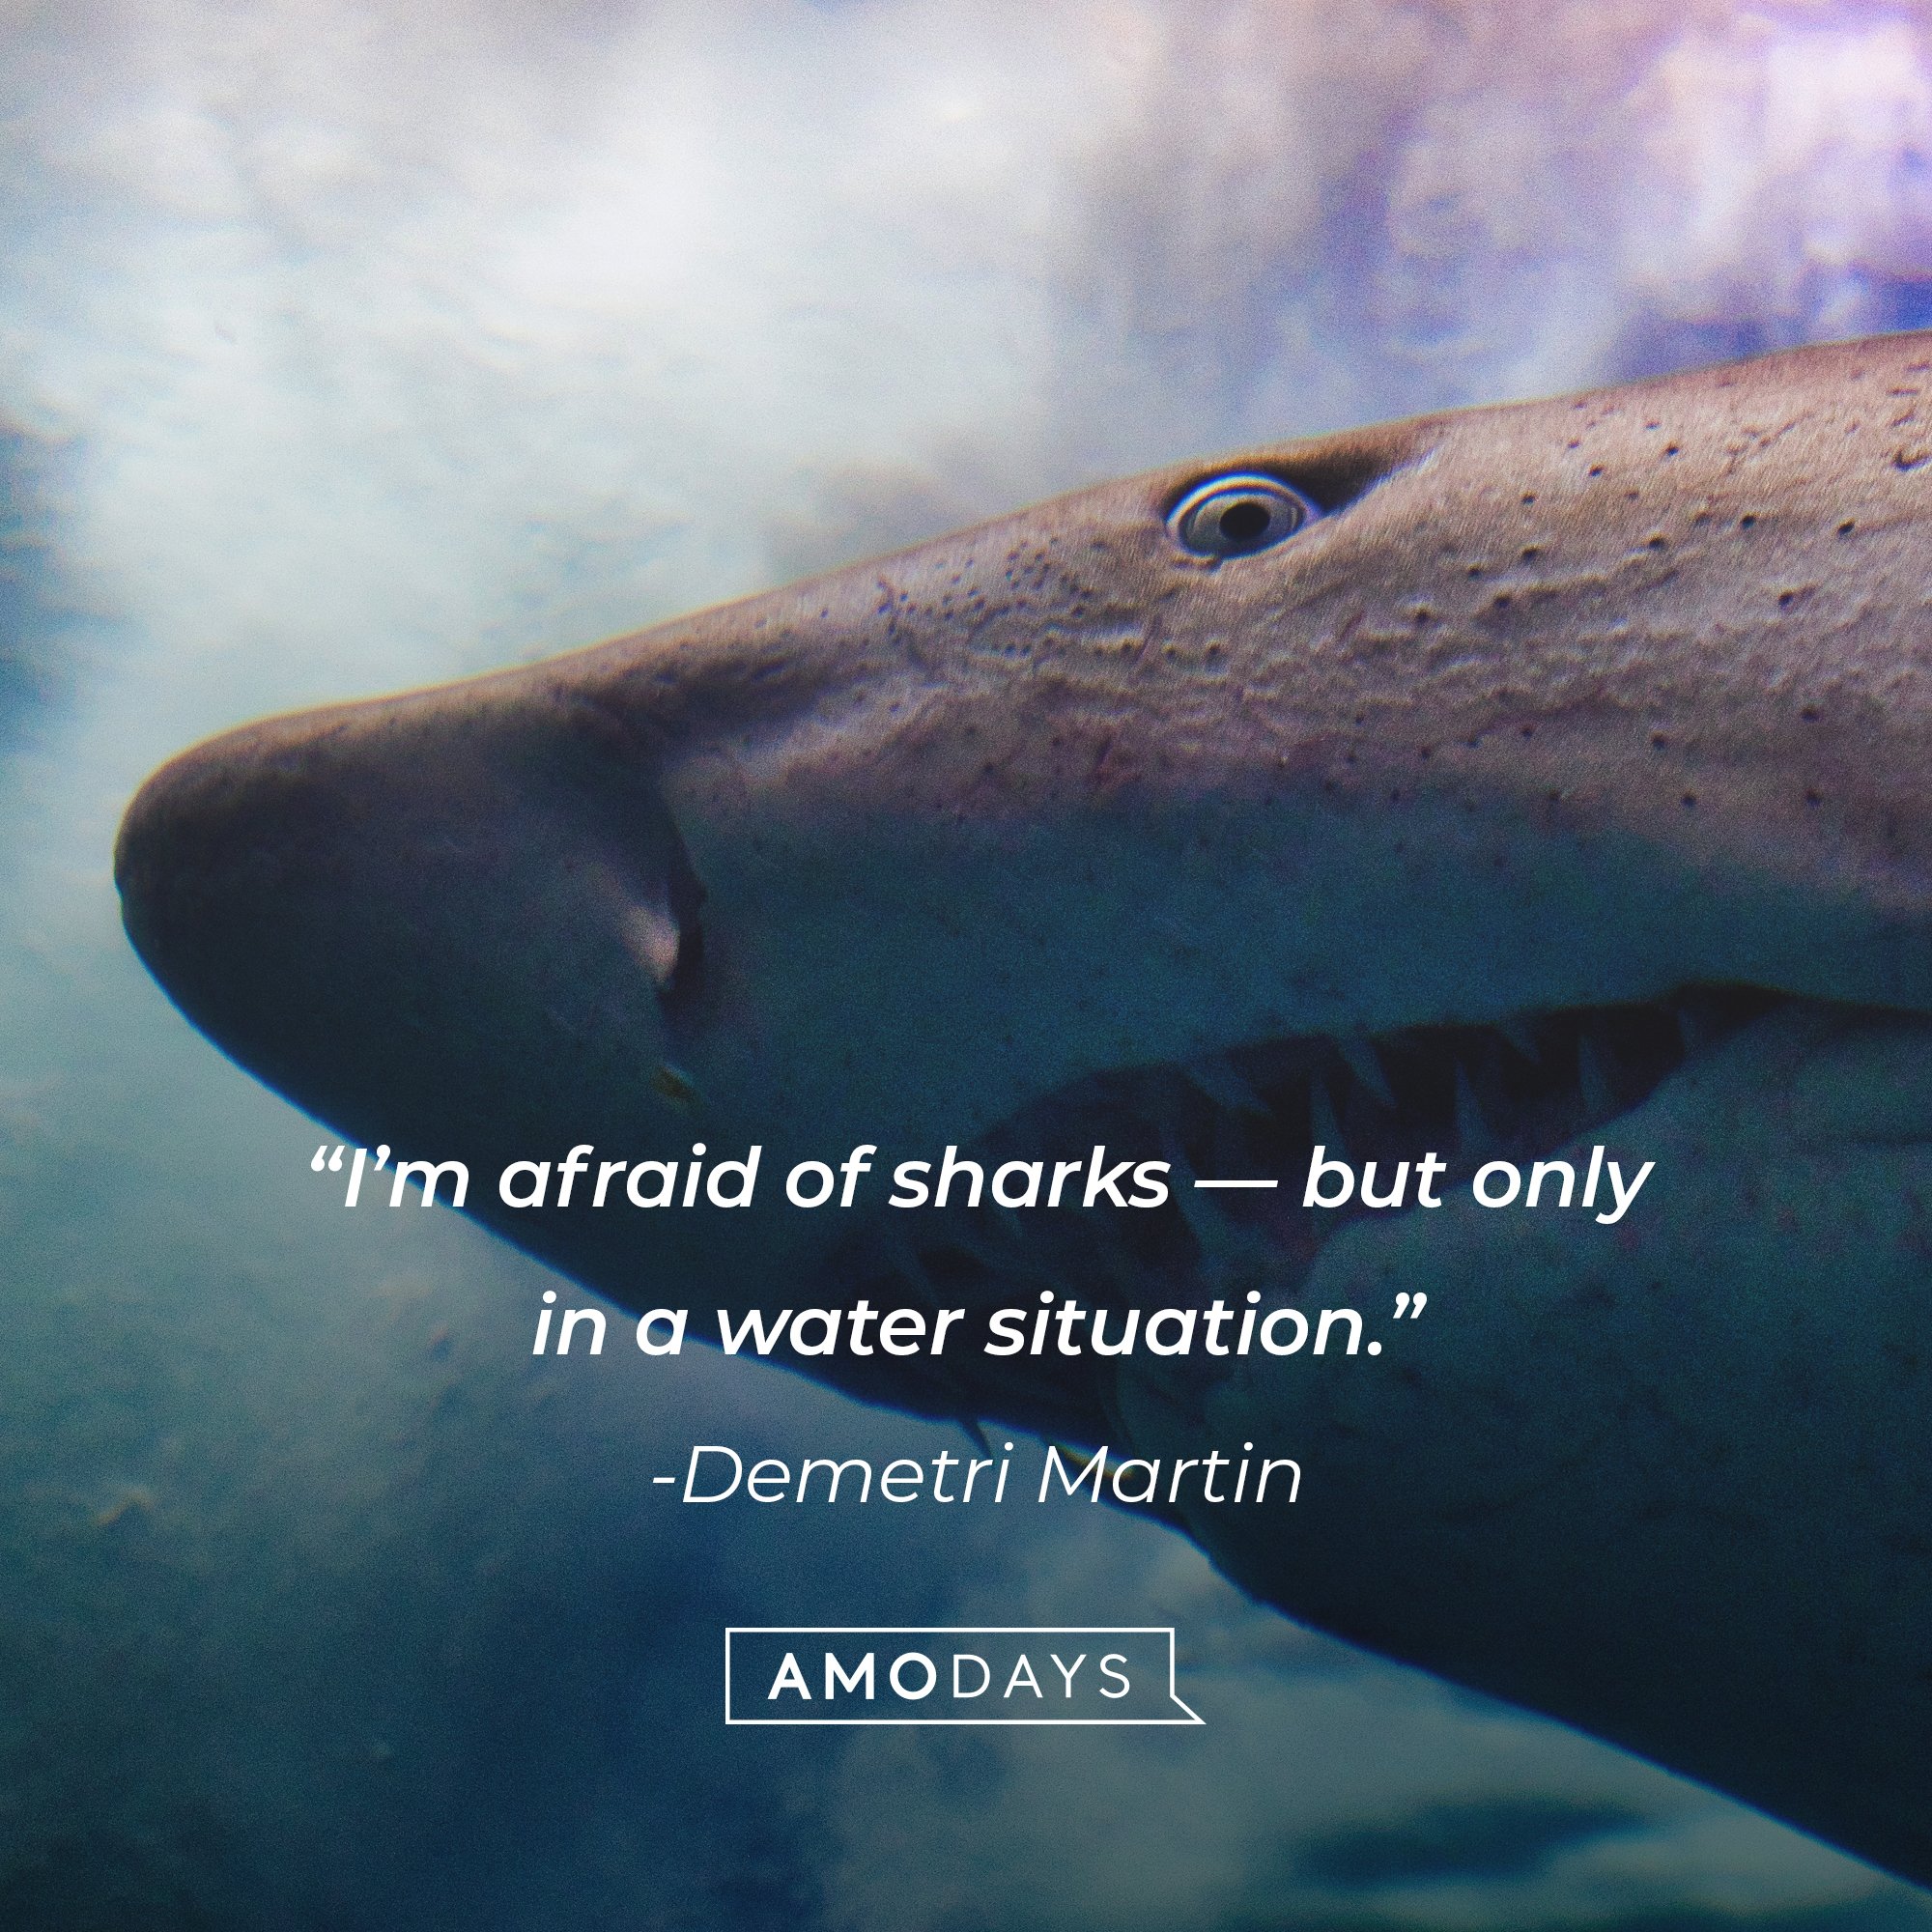 Demetri Martin's quote: “I’m afraid of sharks—but only in a water situation.” | Image: AmoDays 